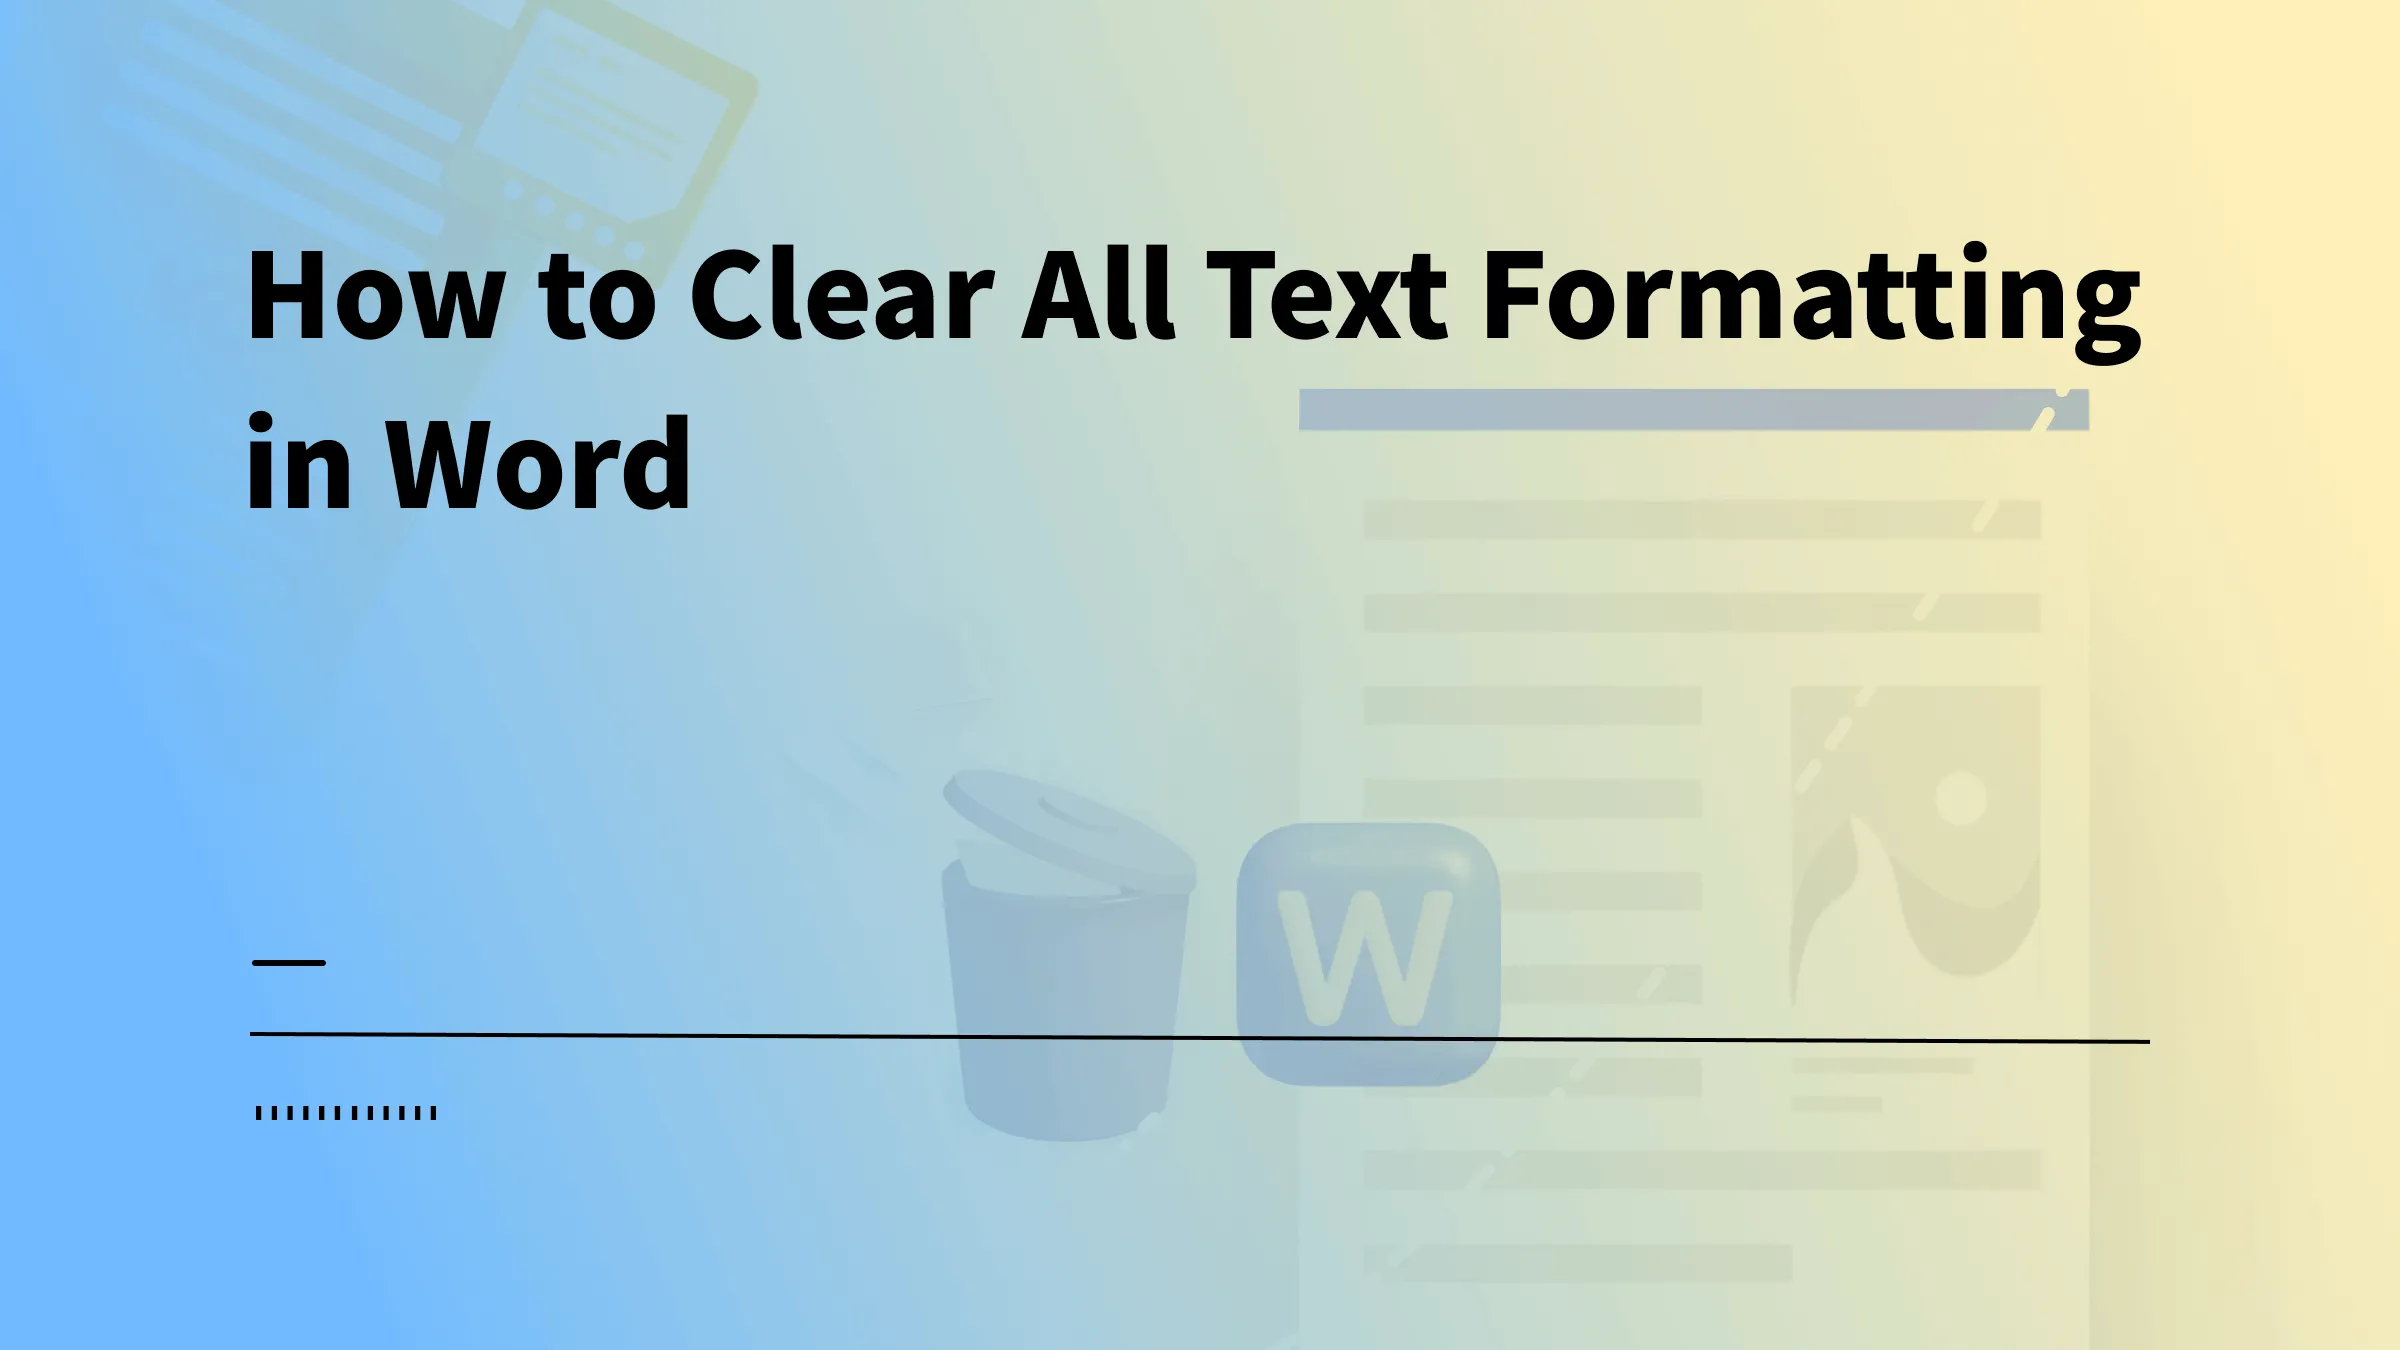 How to Clear All Text Formatting in Word